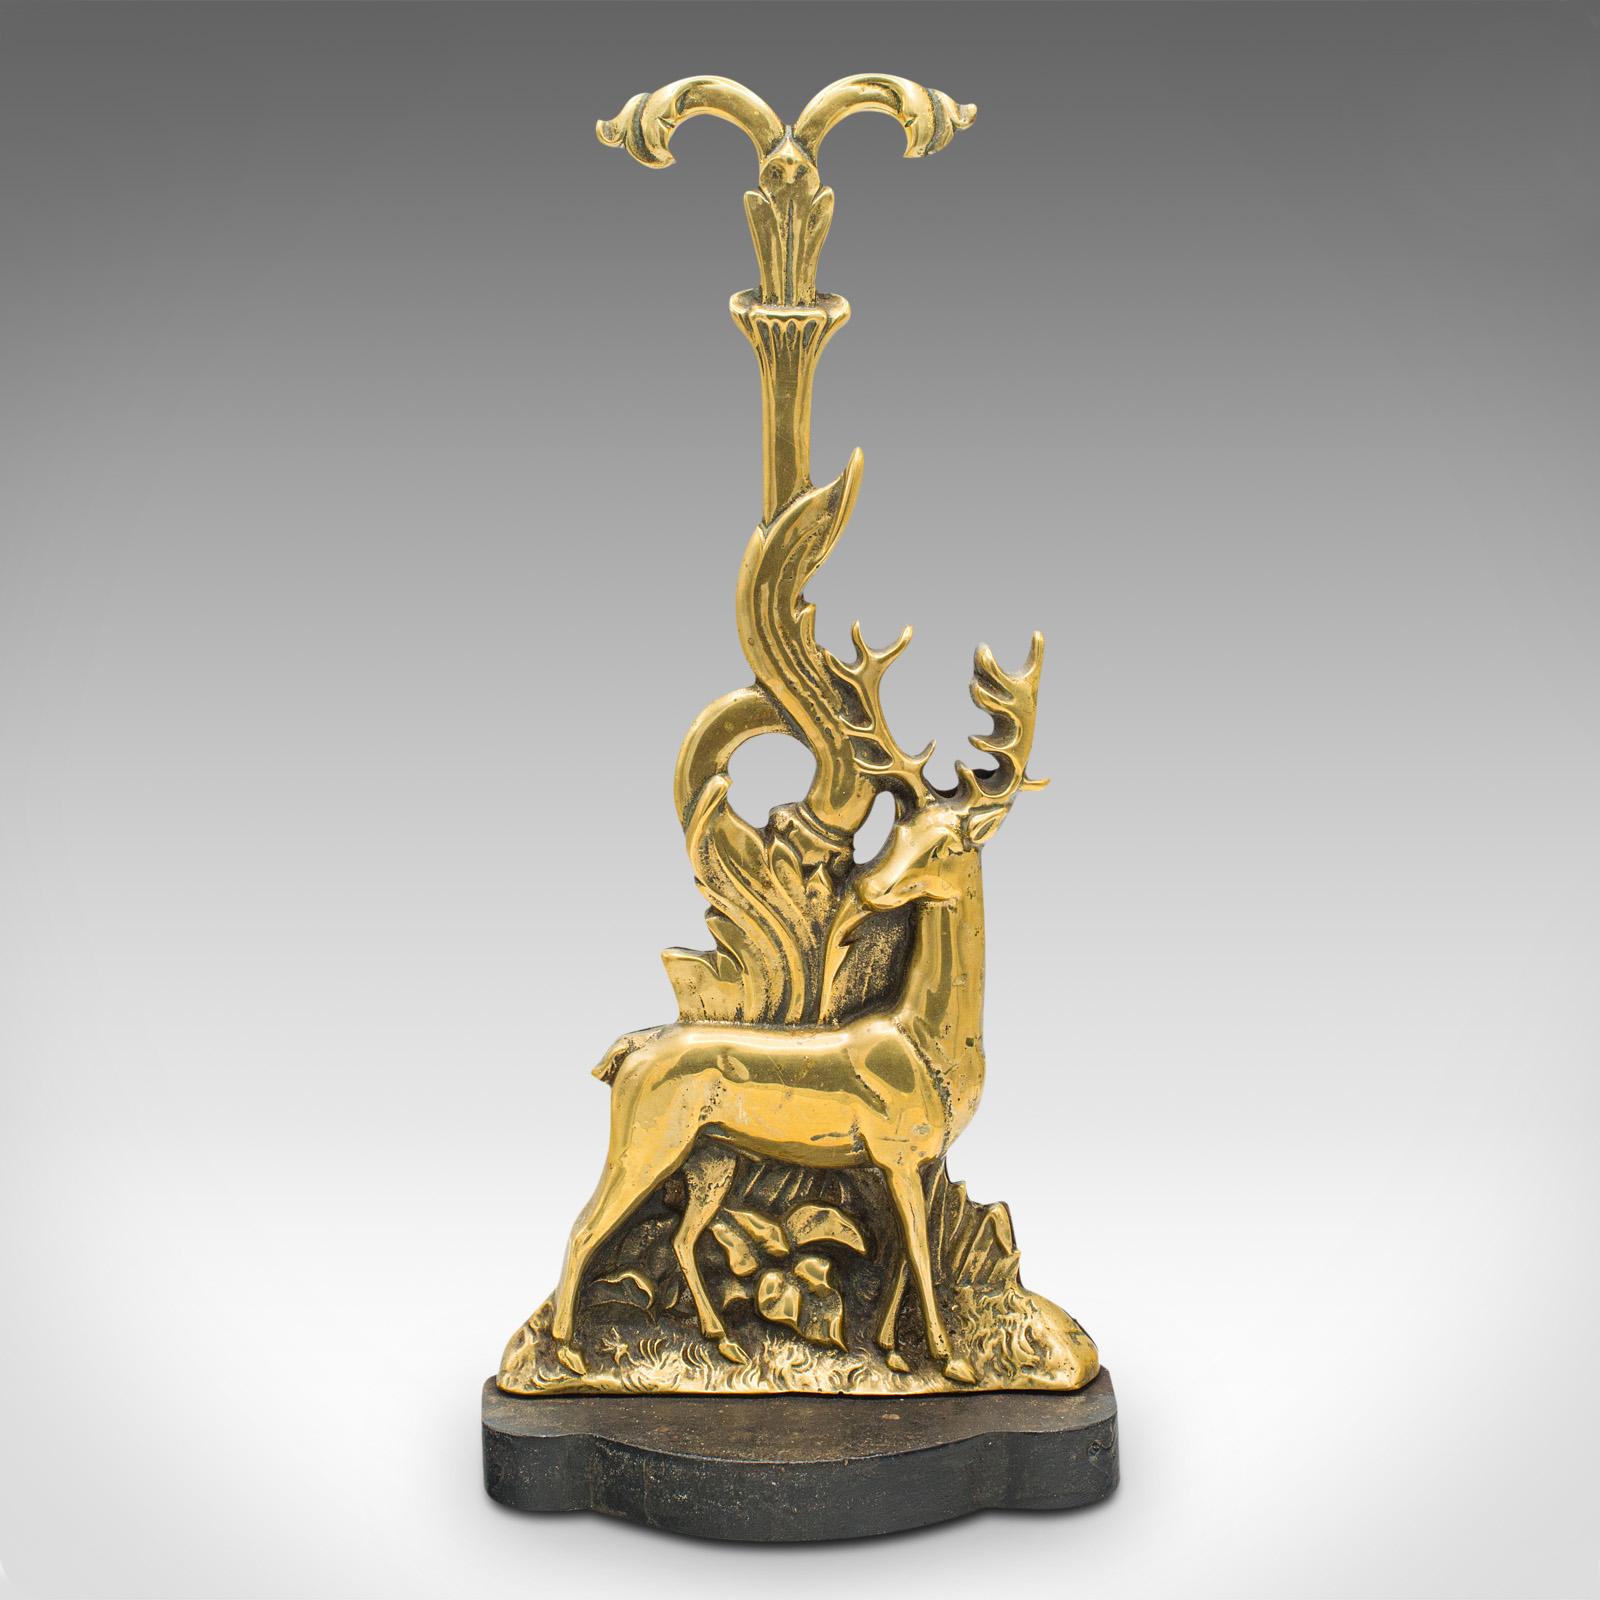 This is an antique Highland doorstop. A Scottish, brass and cast iron decorative door keeper with stag figure, dating to the mid Victorian period, circa 1870.

Delightful doorstop, proudly presenting Scottish taste and theme
Displays a desirable